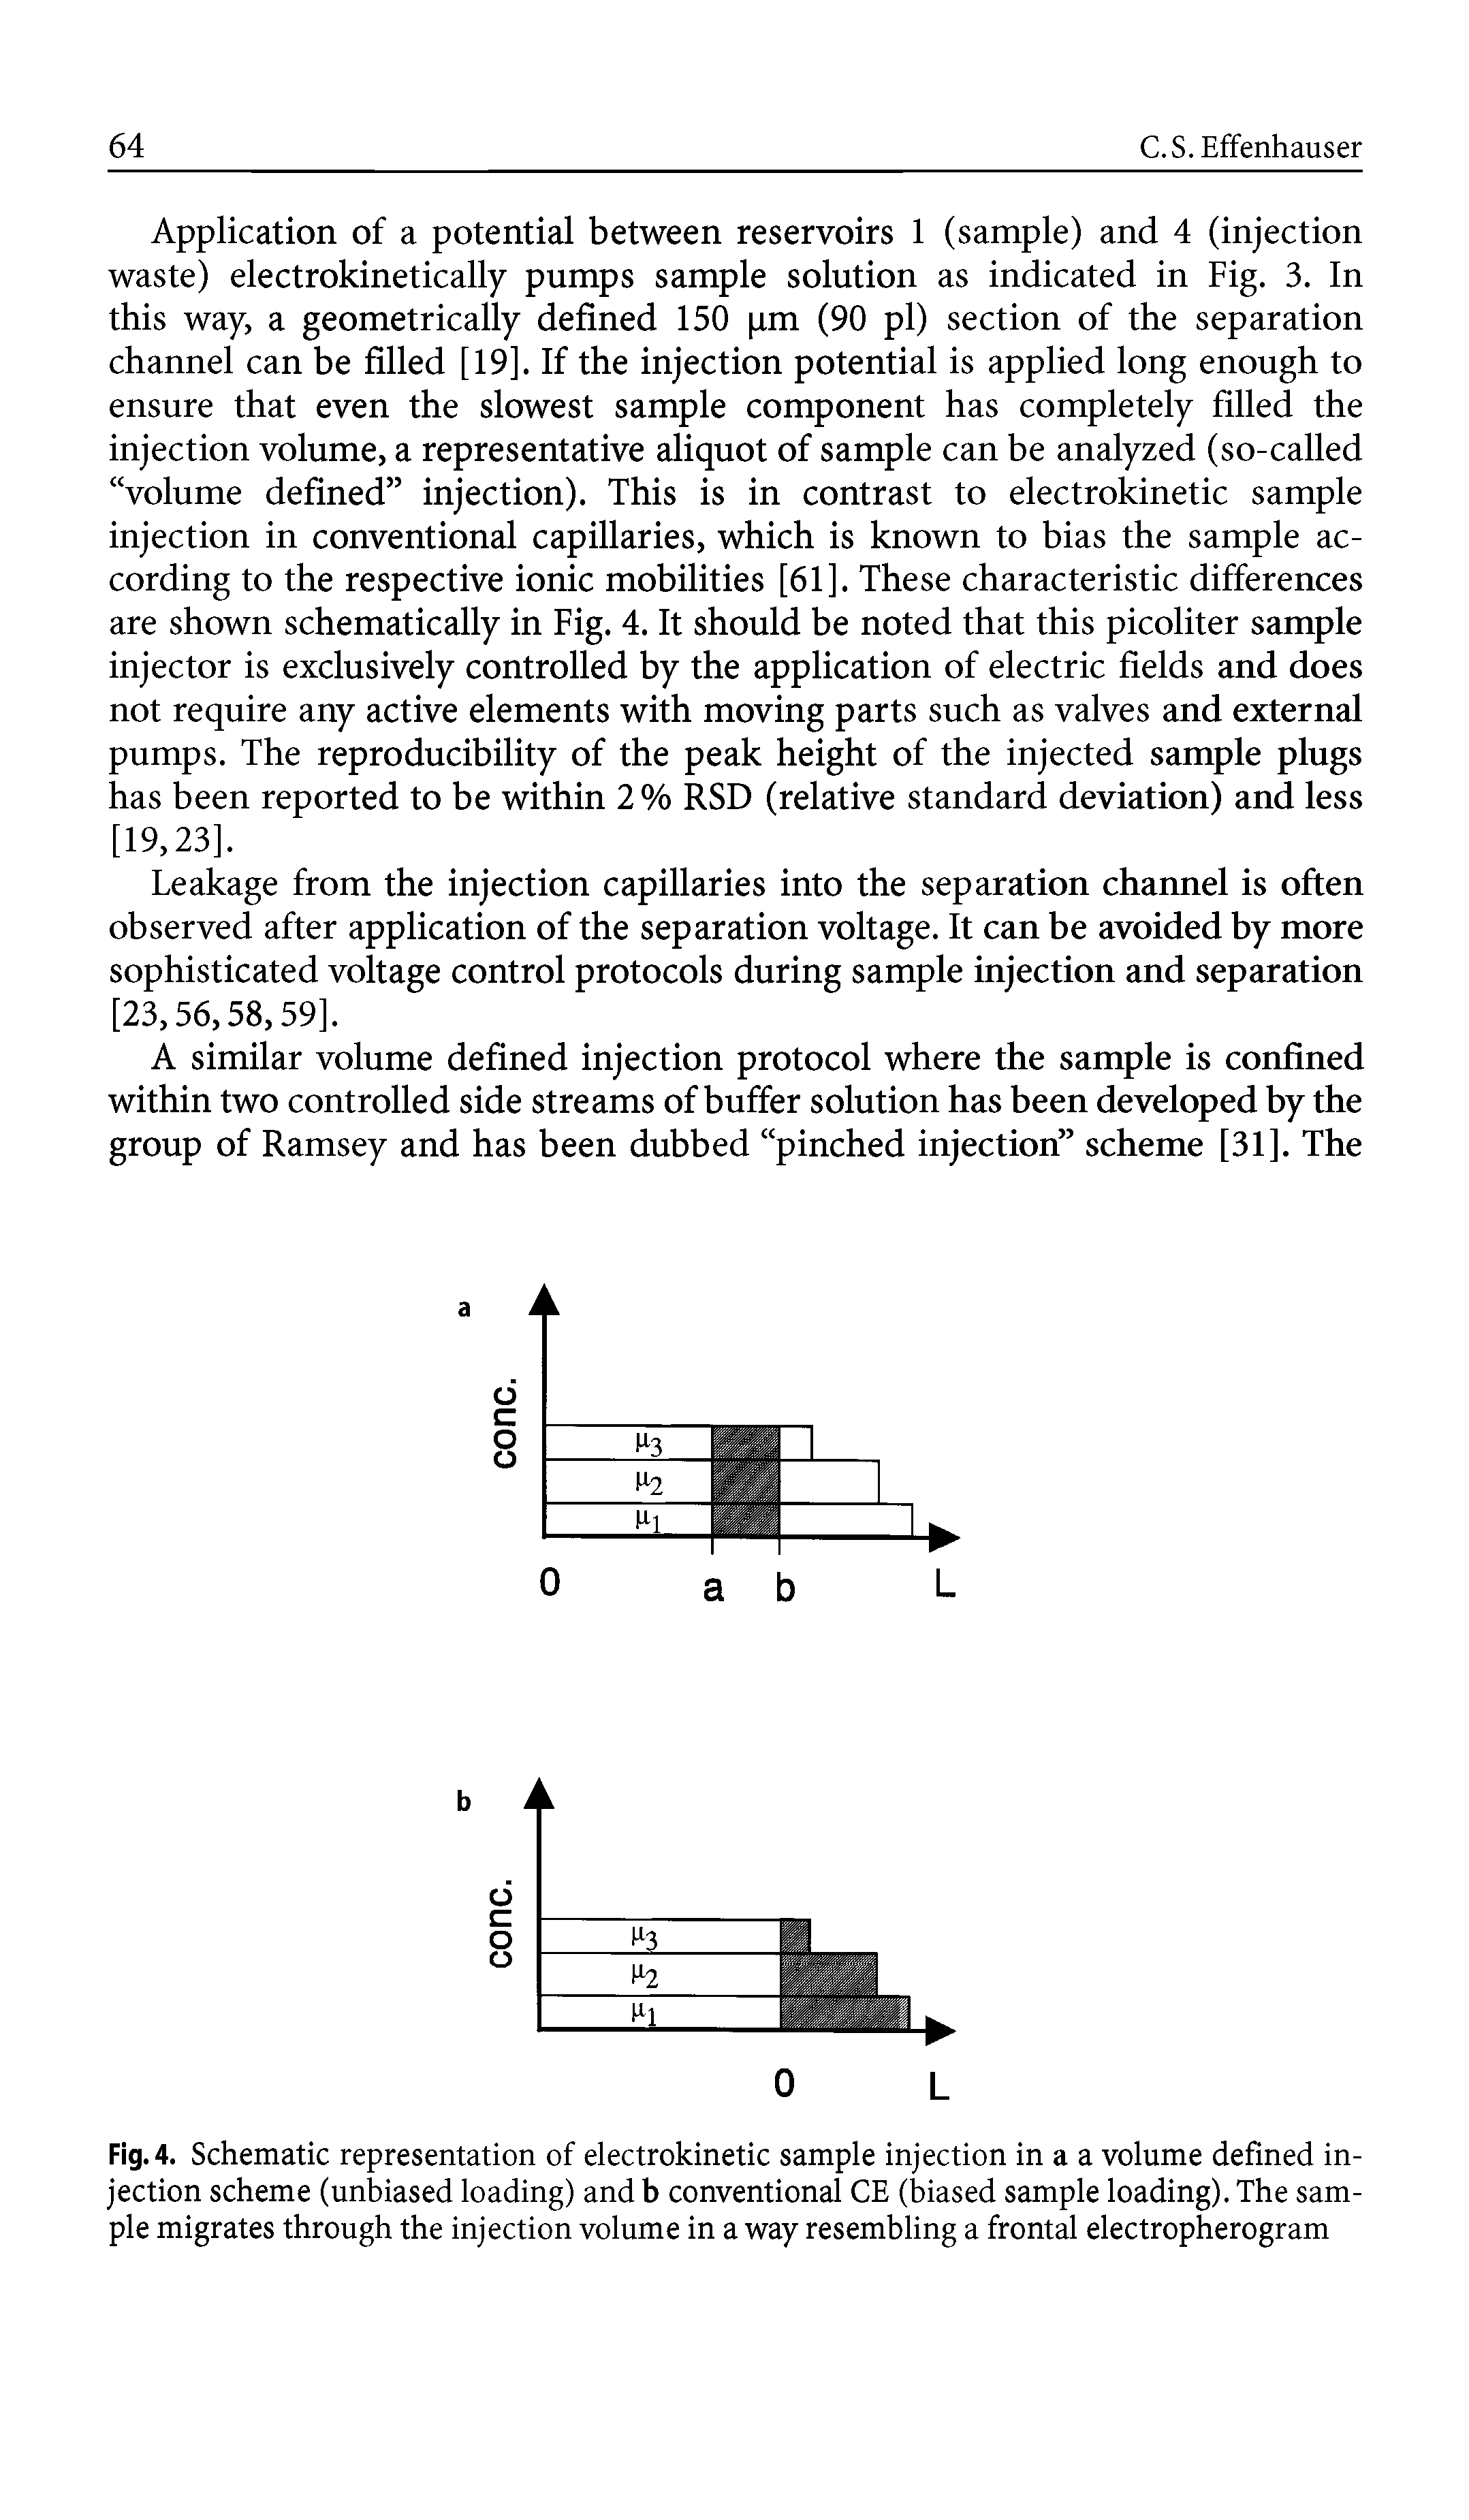 Fig. 4. Schematic representation of electrokinetic sample injection in a a volume defined injection scheme (unbiased loading) and b conventional CE (biased sample loading). The sample migrates through the injection volume in a way resembling a frontal electropherogram...